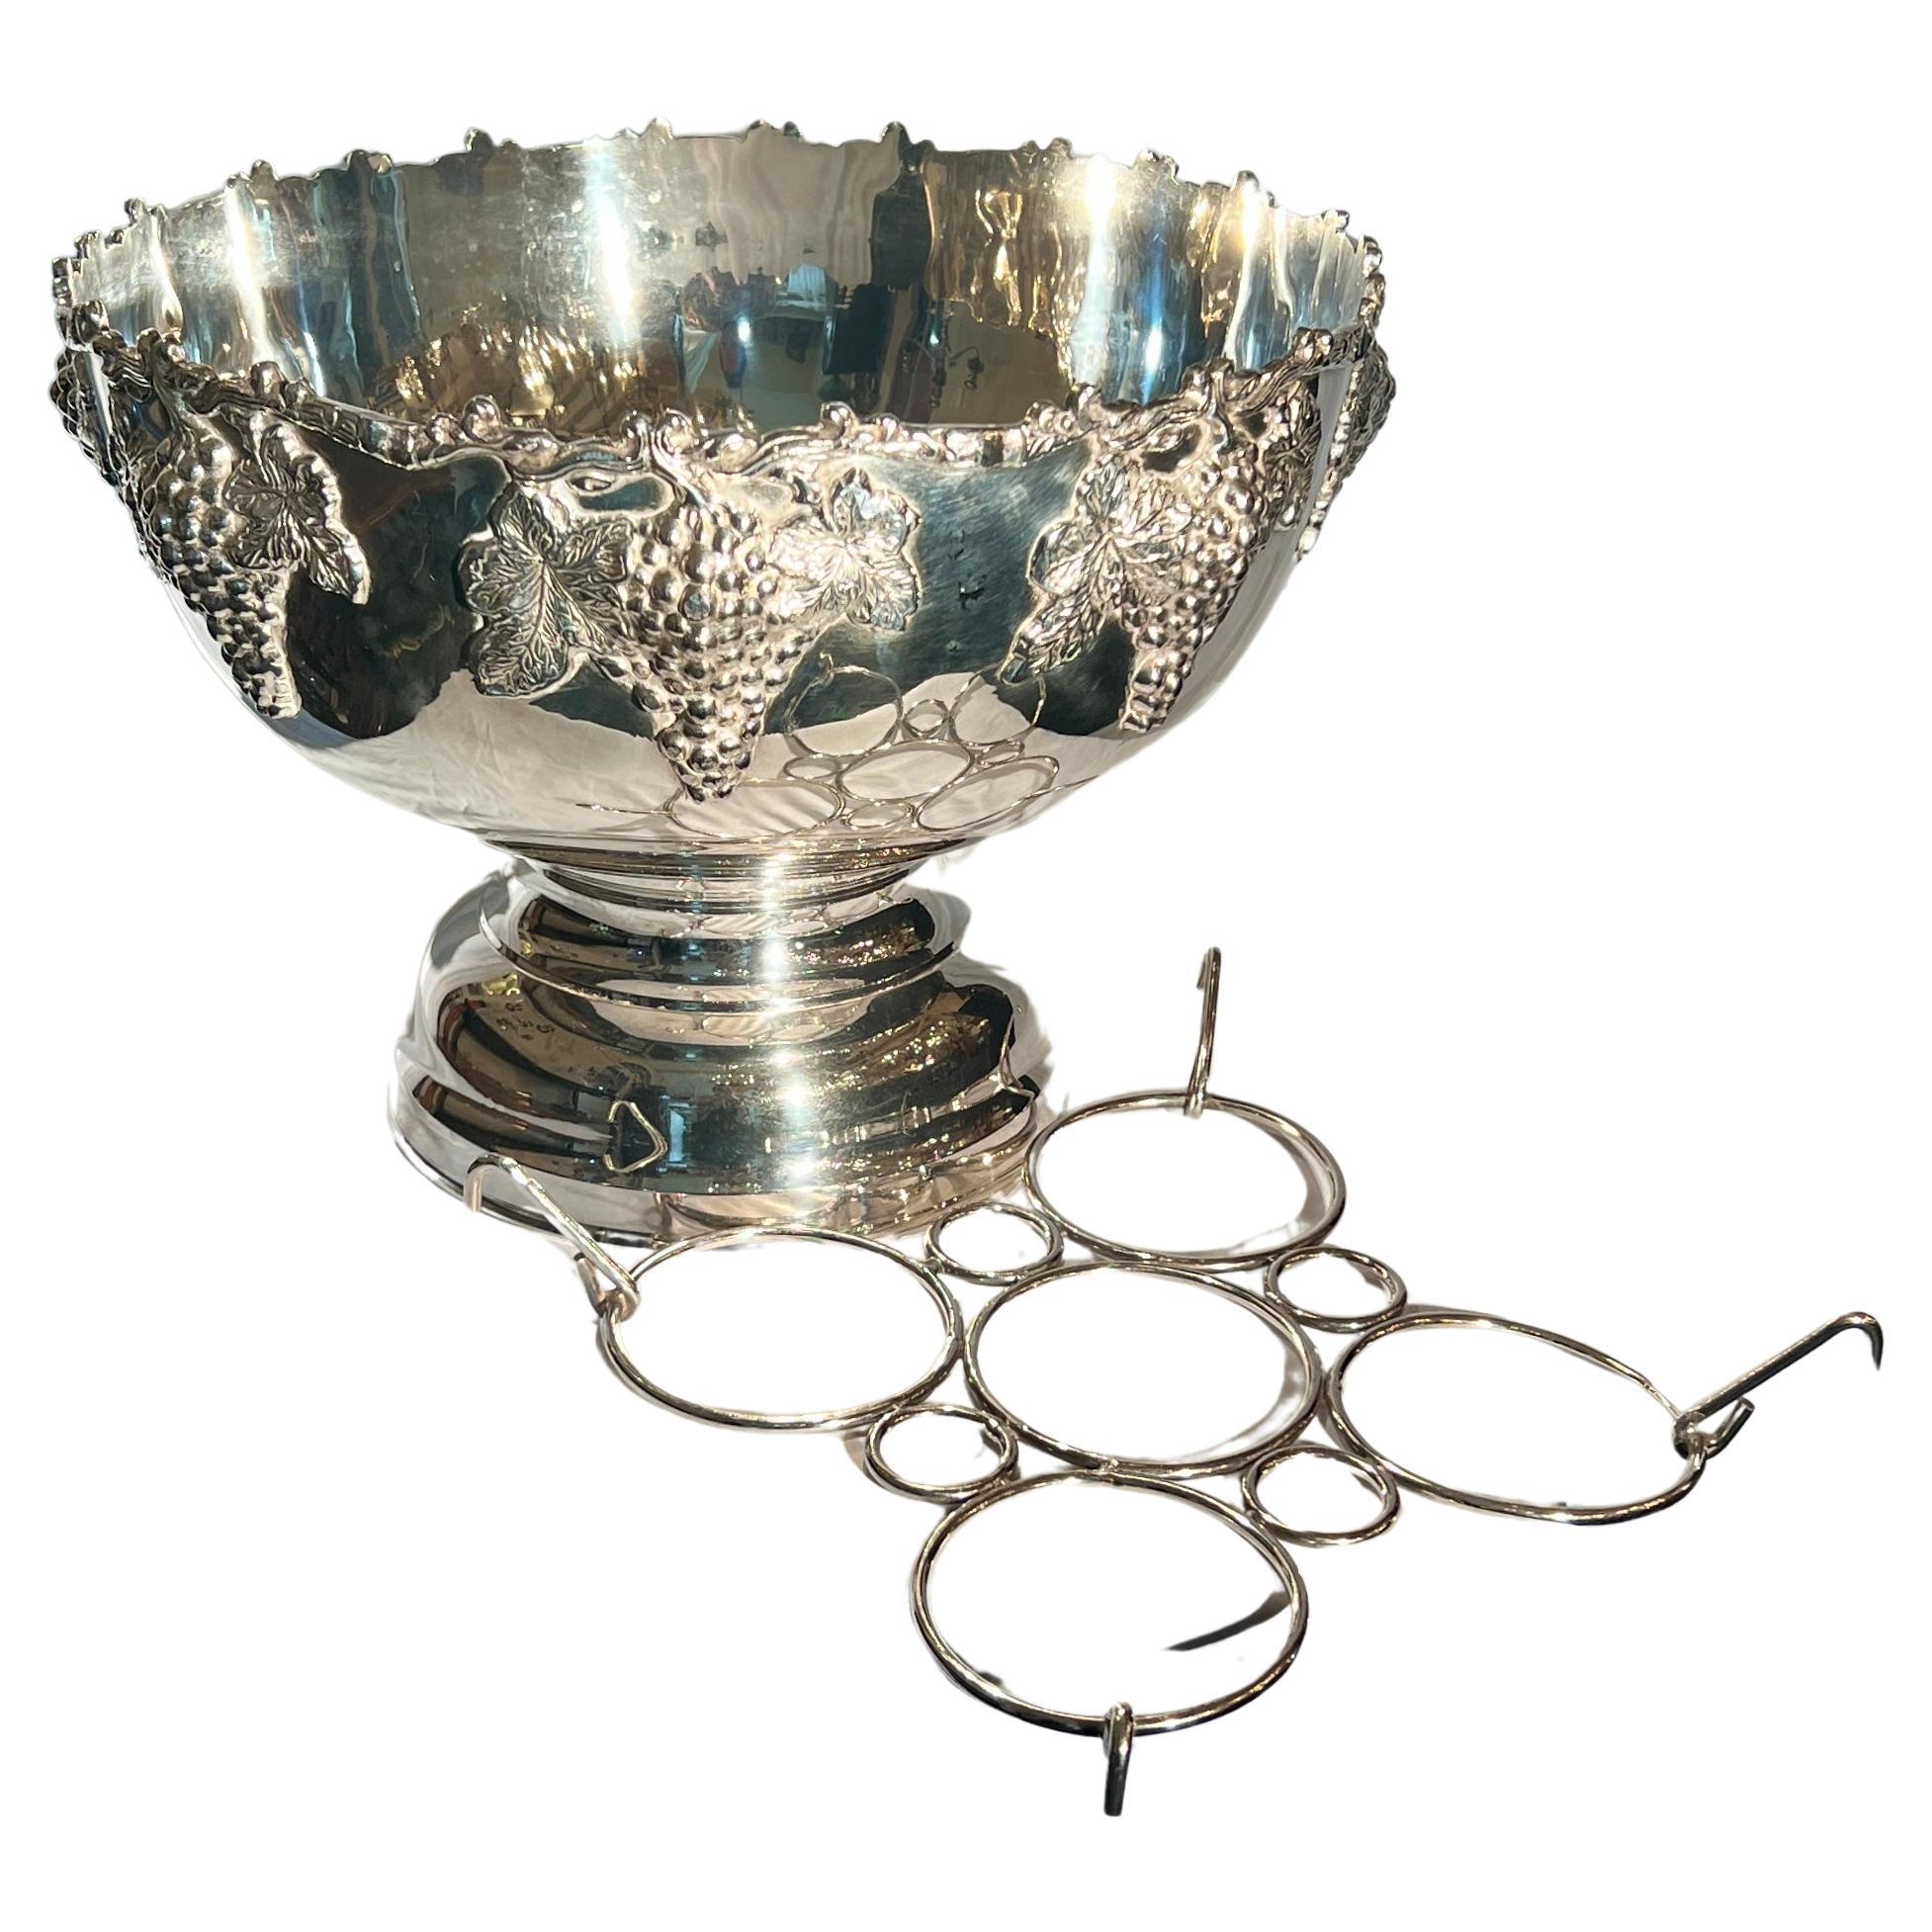 20th Century Estate Silver Plated Champagne or Wine Color With Fitted Rack, Circa 1940's.